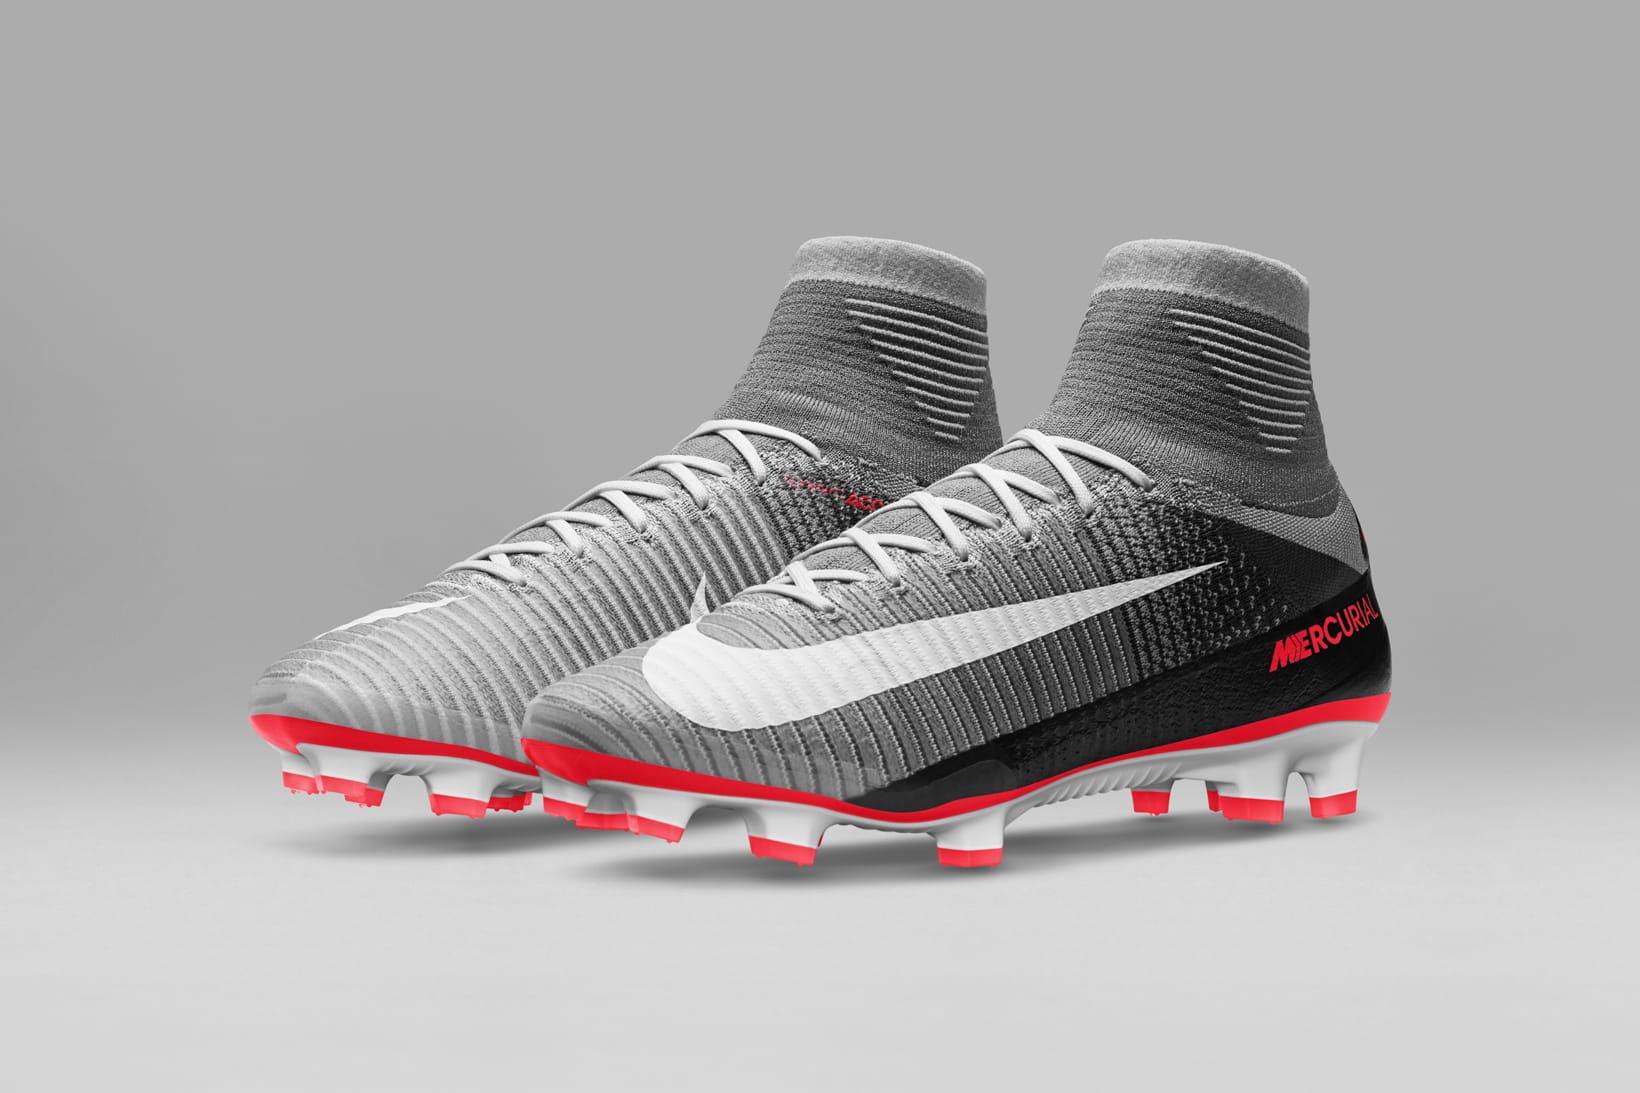 Nike Football Boots in Iconic Air Max 